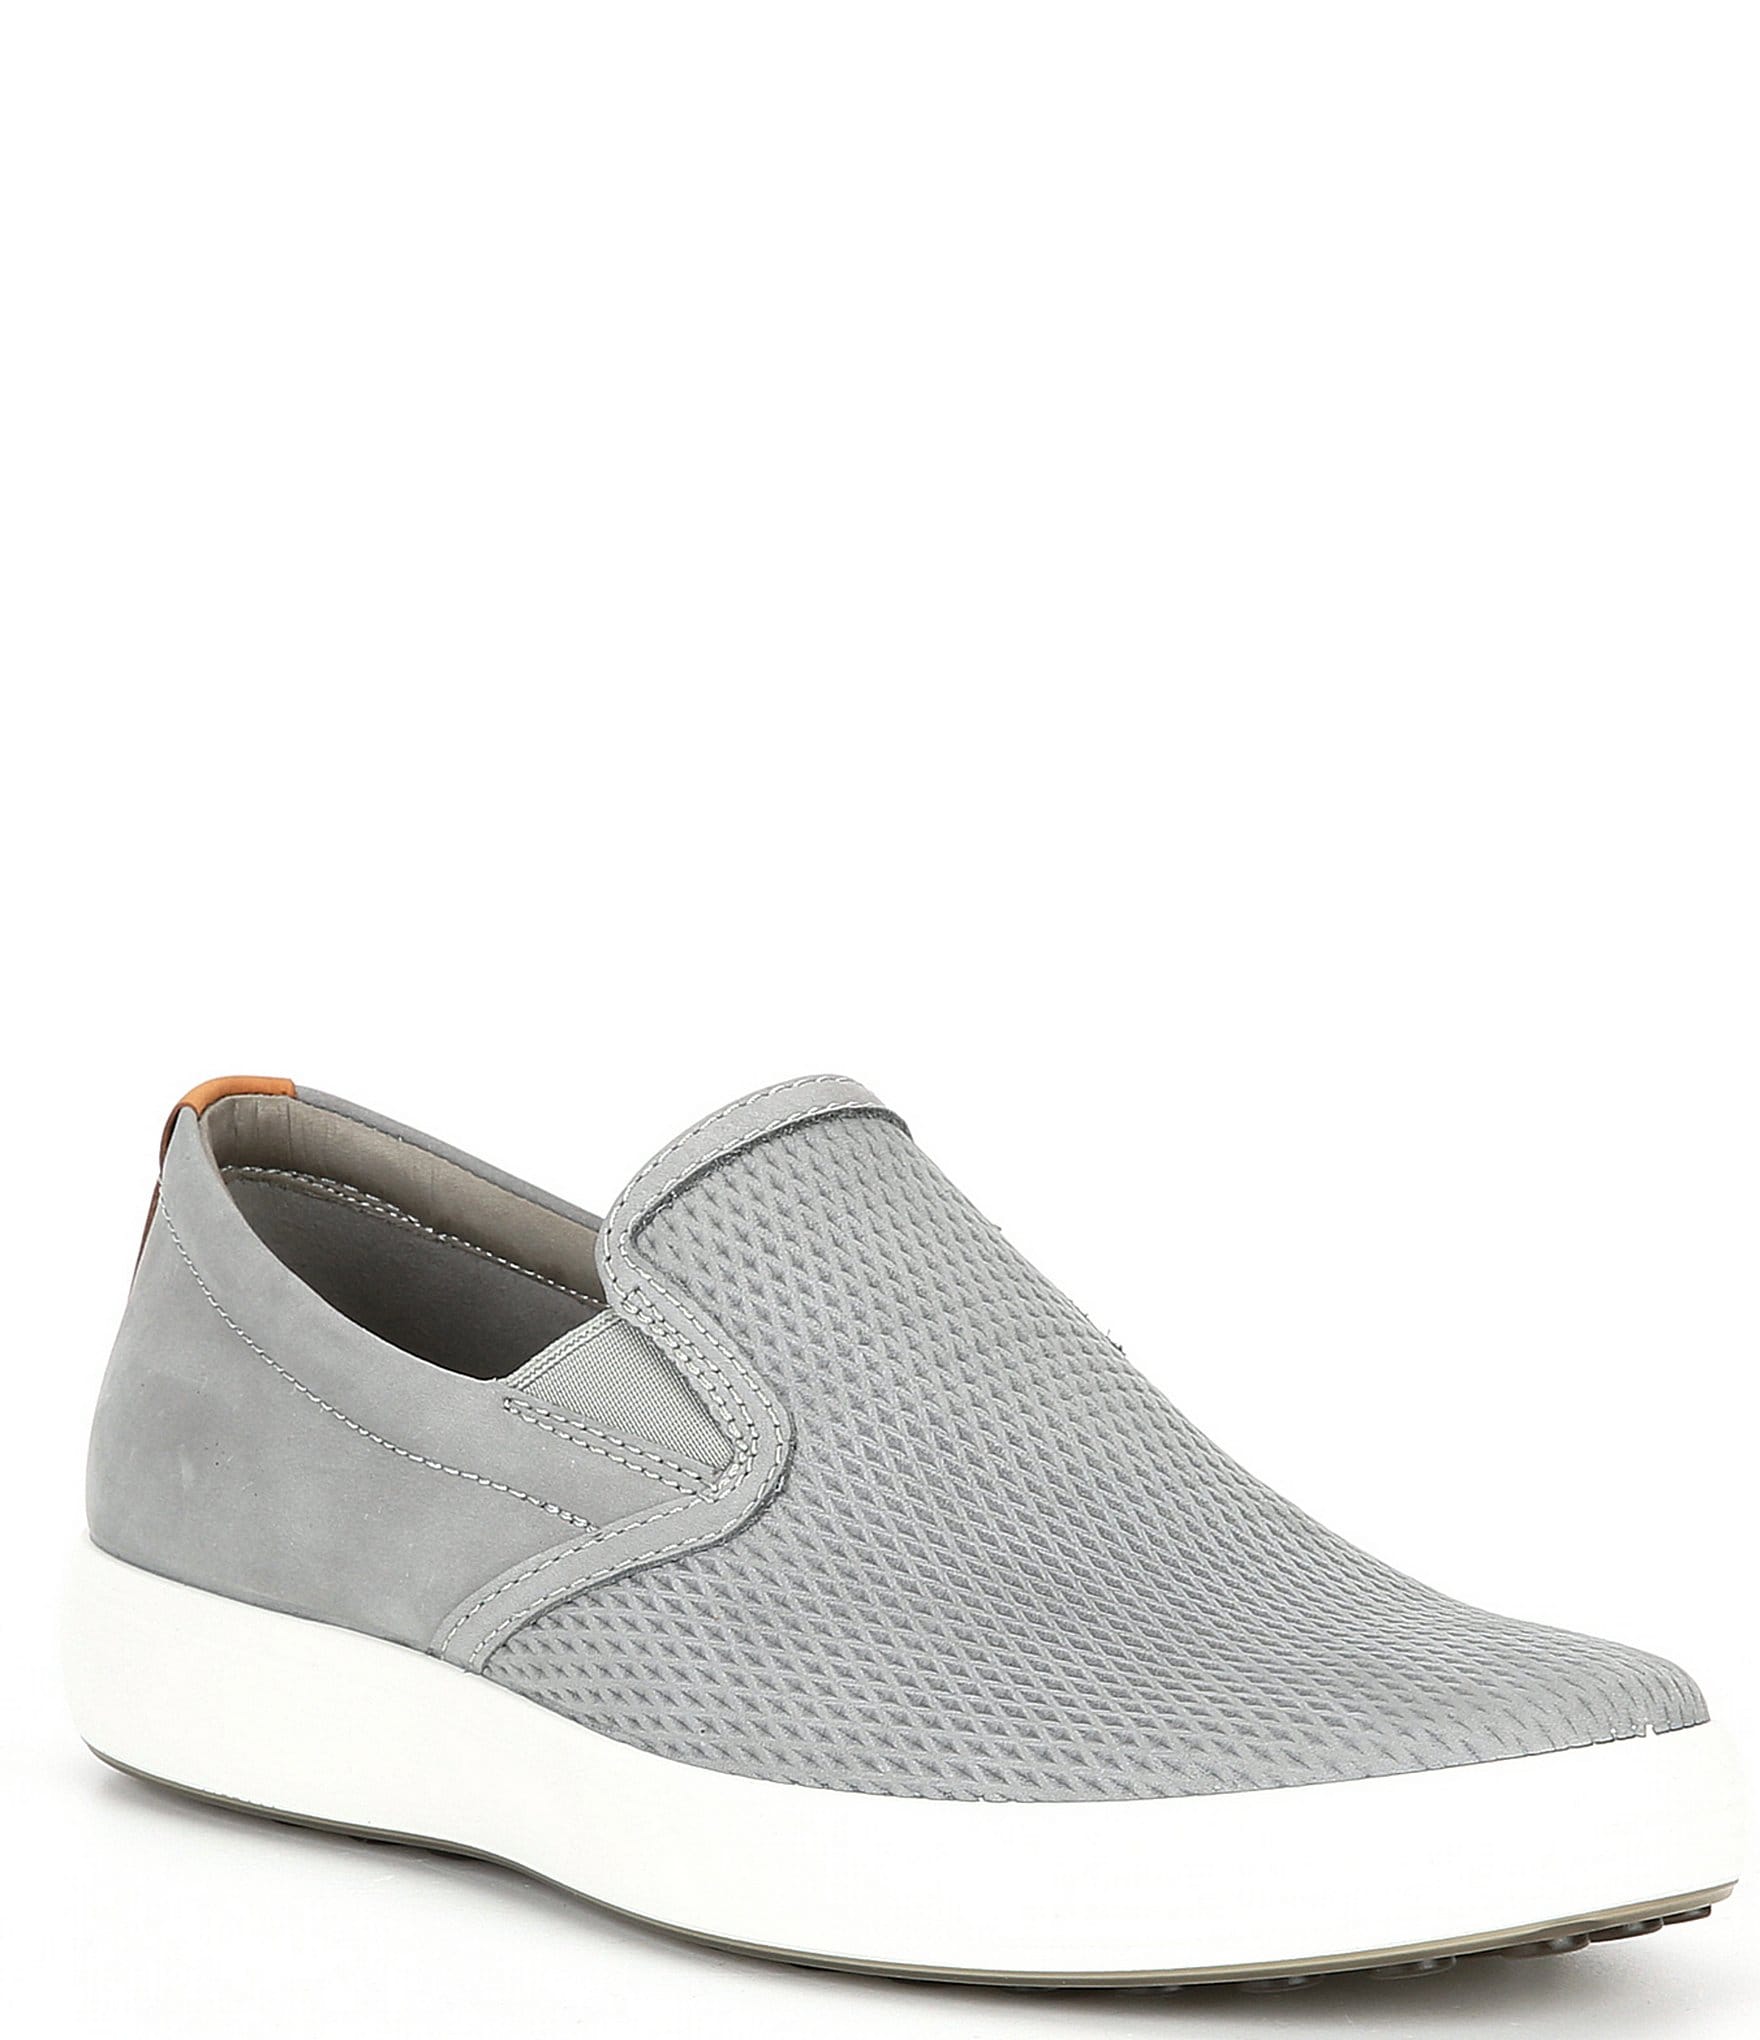 ECCO Men's Soft 7 Perforated Slip-On Sneakers